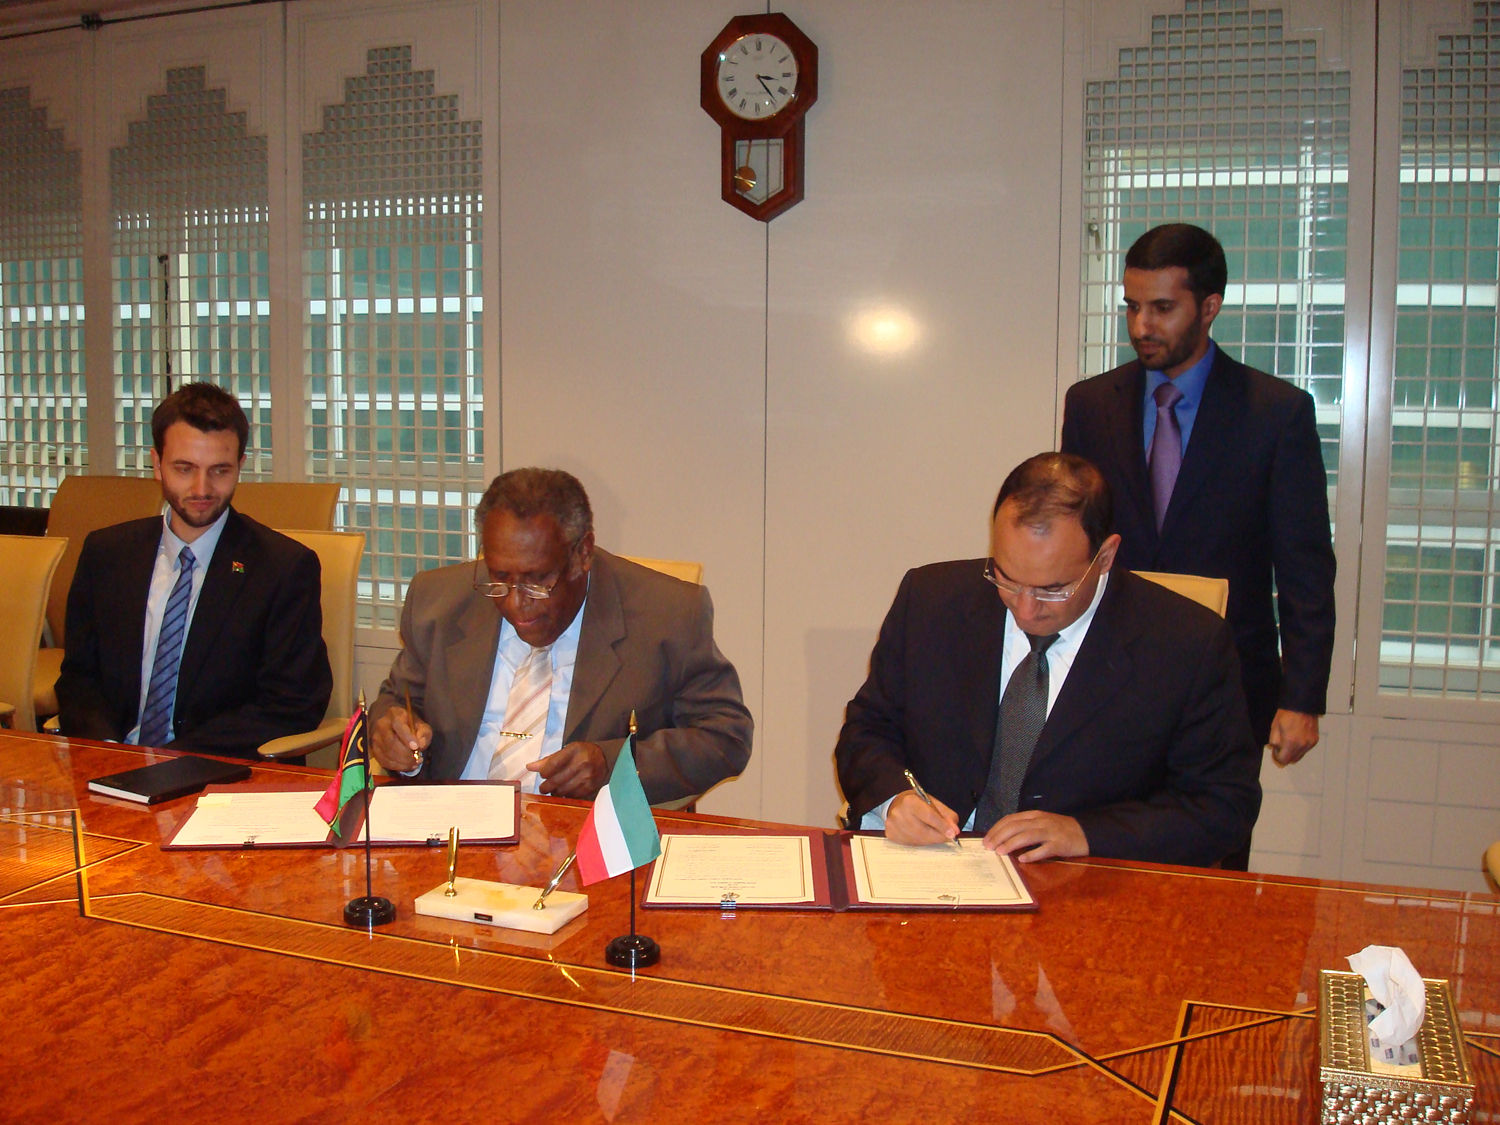 The Kuwaiti permanent delegate to the UN, Ambassador Mansour Al-Otaibi during the signing of the agreement with his counterpart Ambassador of Vanuatu, Donald Kalpokas